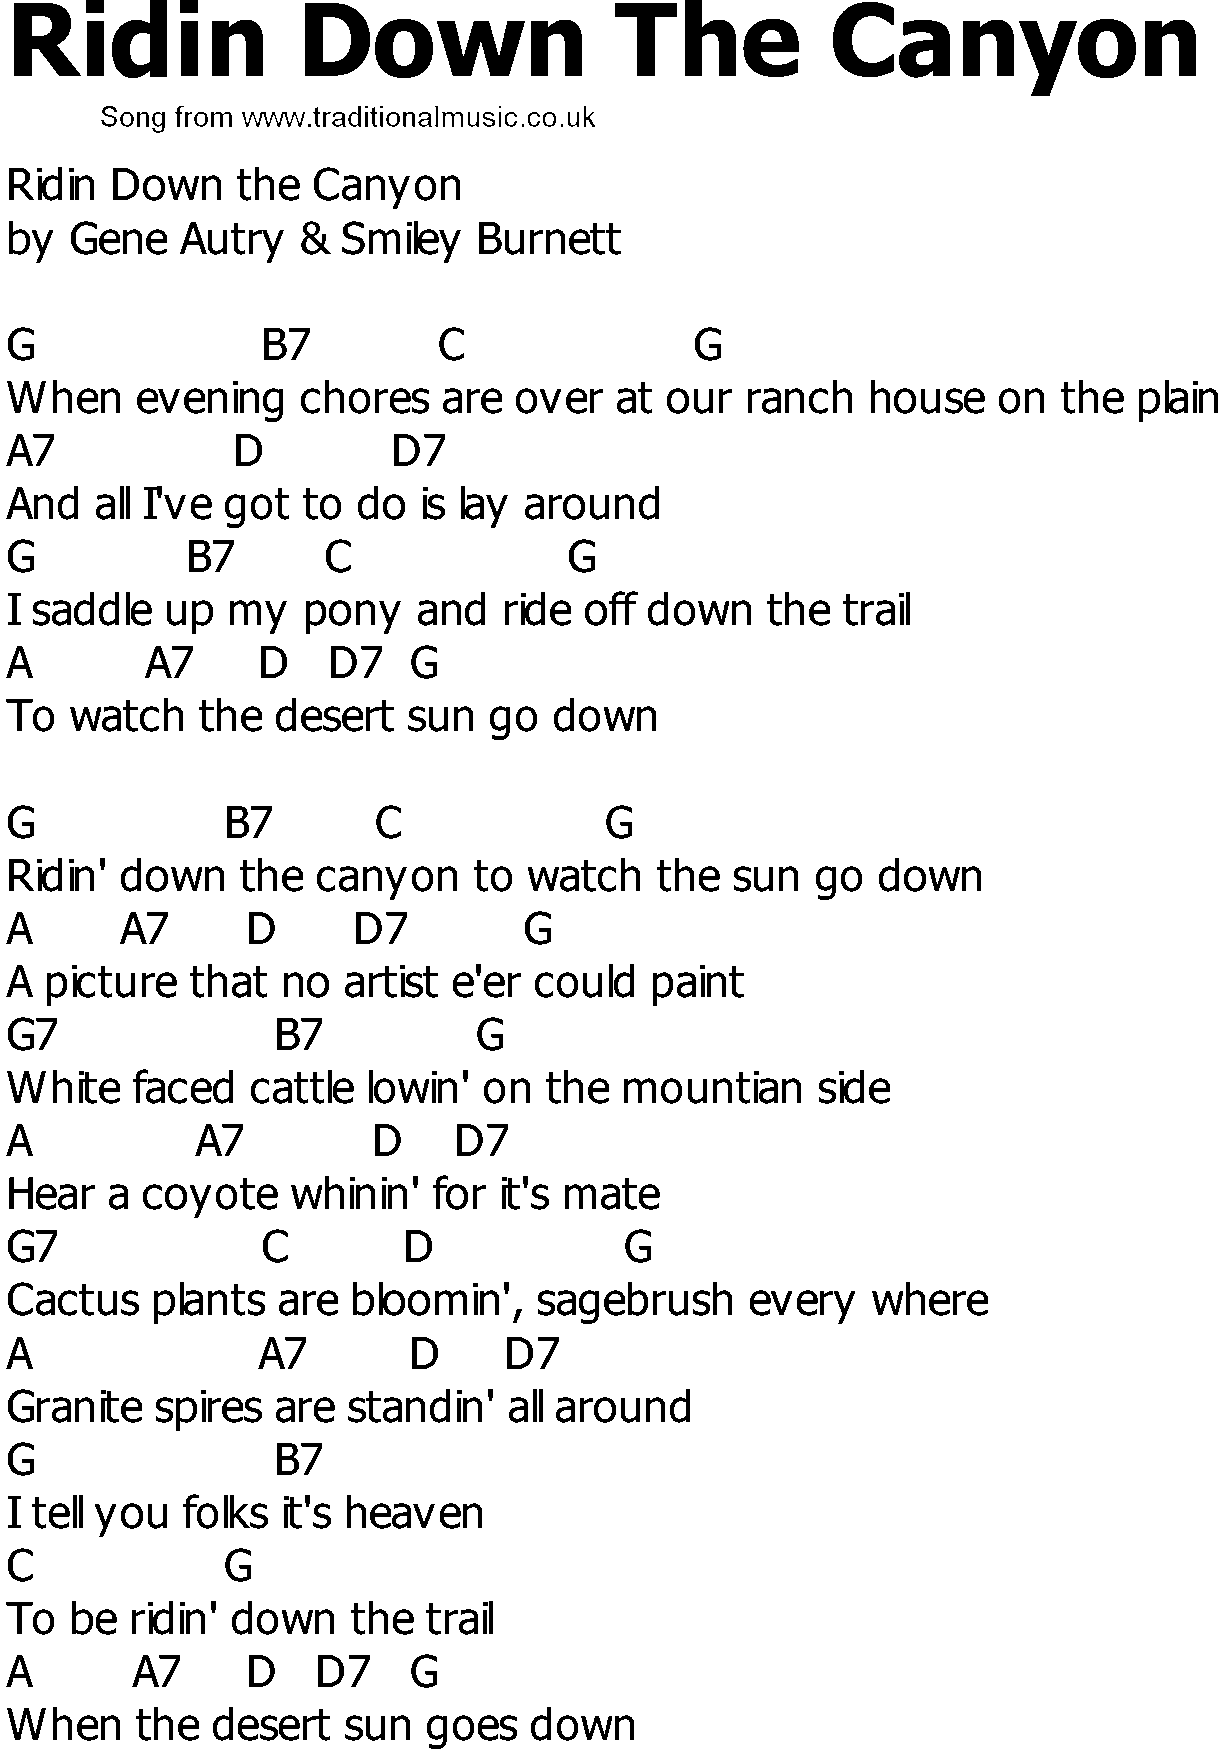 Old Country song lyrics with chords - Ridin Down The Canyon